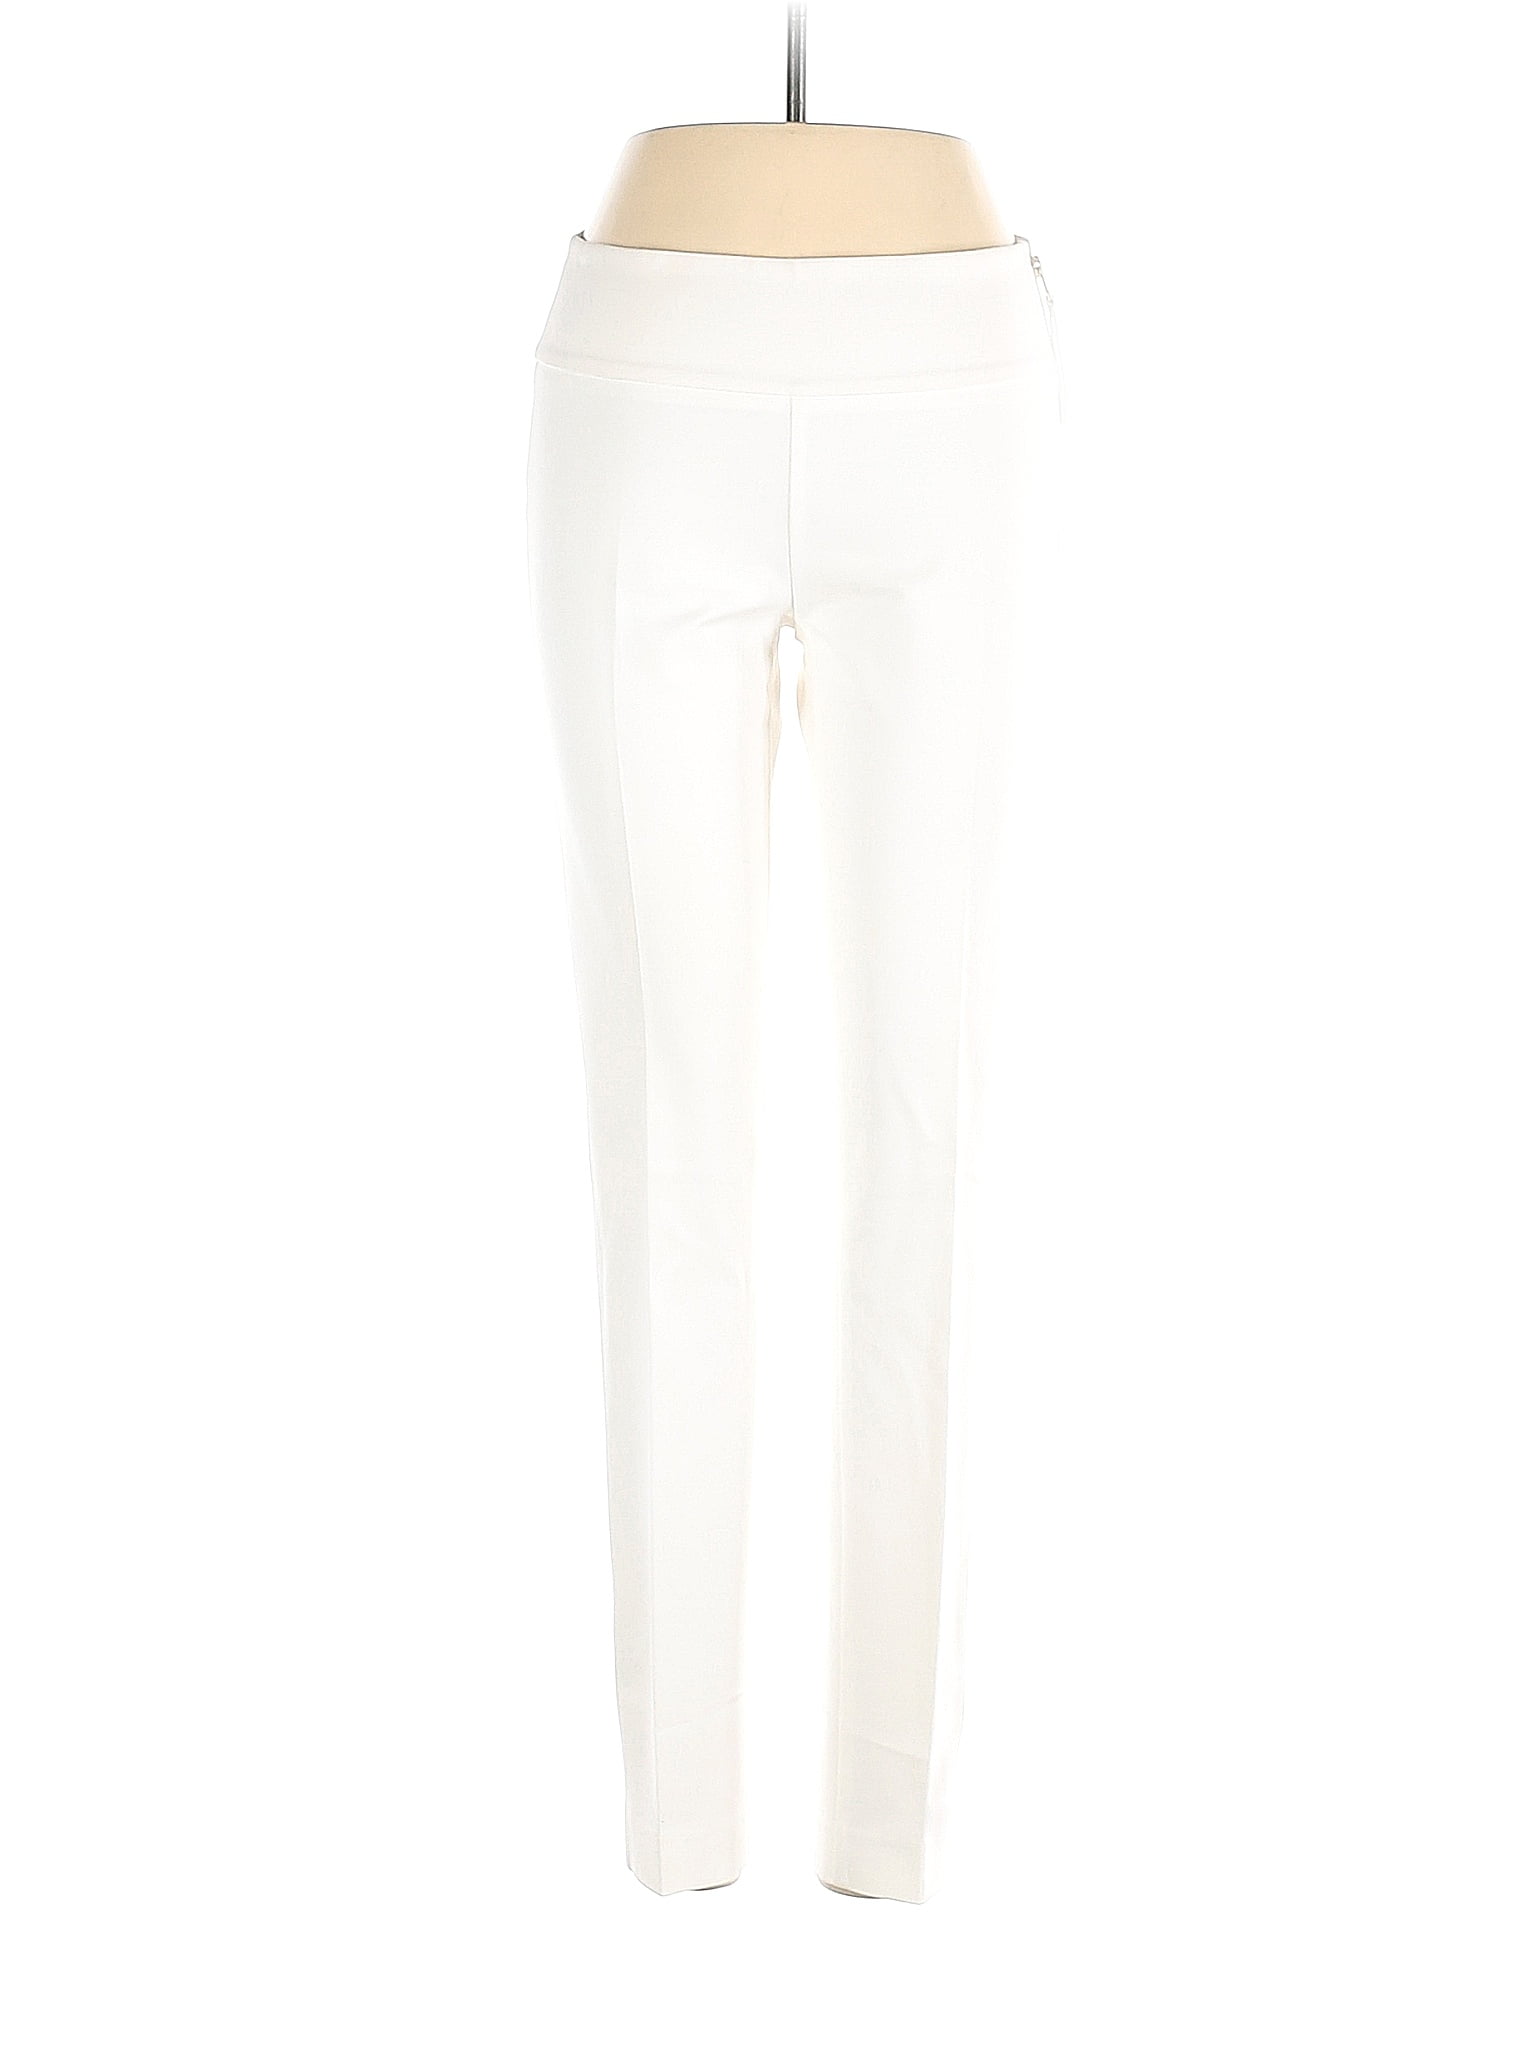 Marciano Solid White Dress Pants Size 2 - 82% off | thredUP